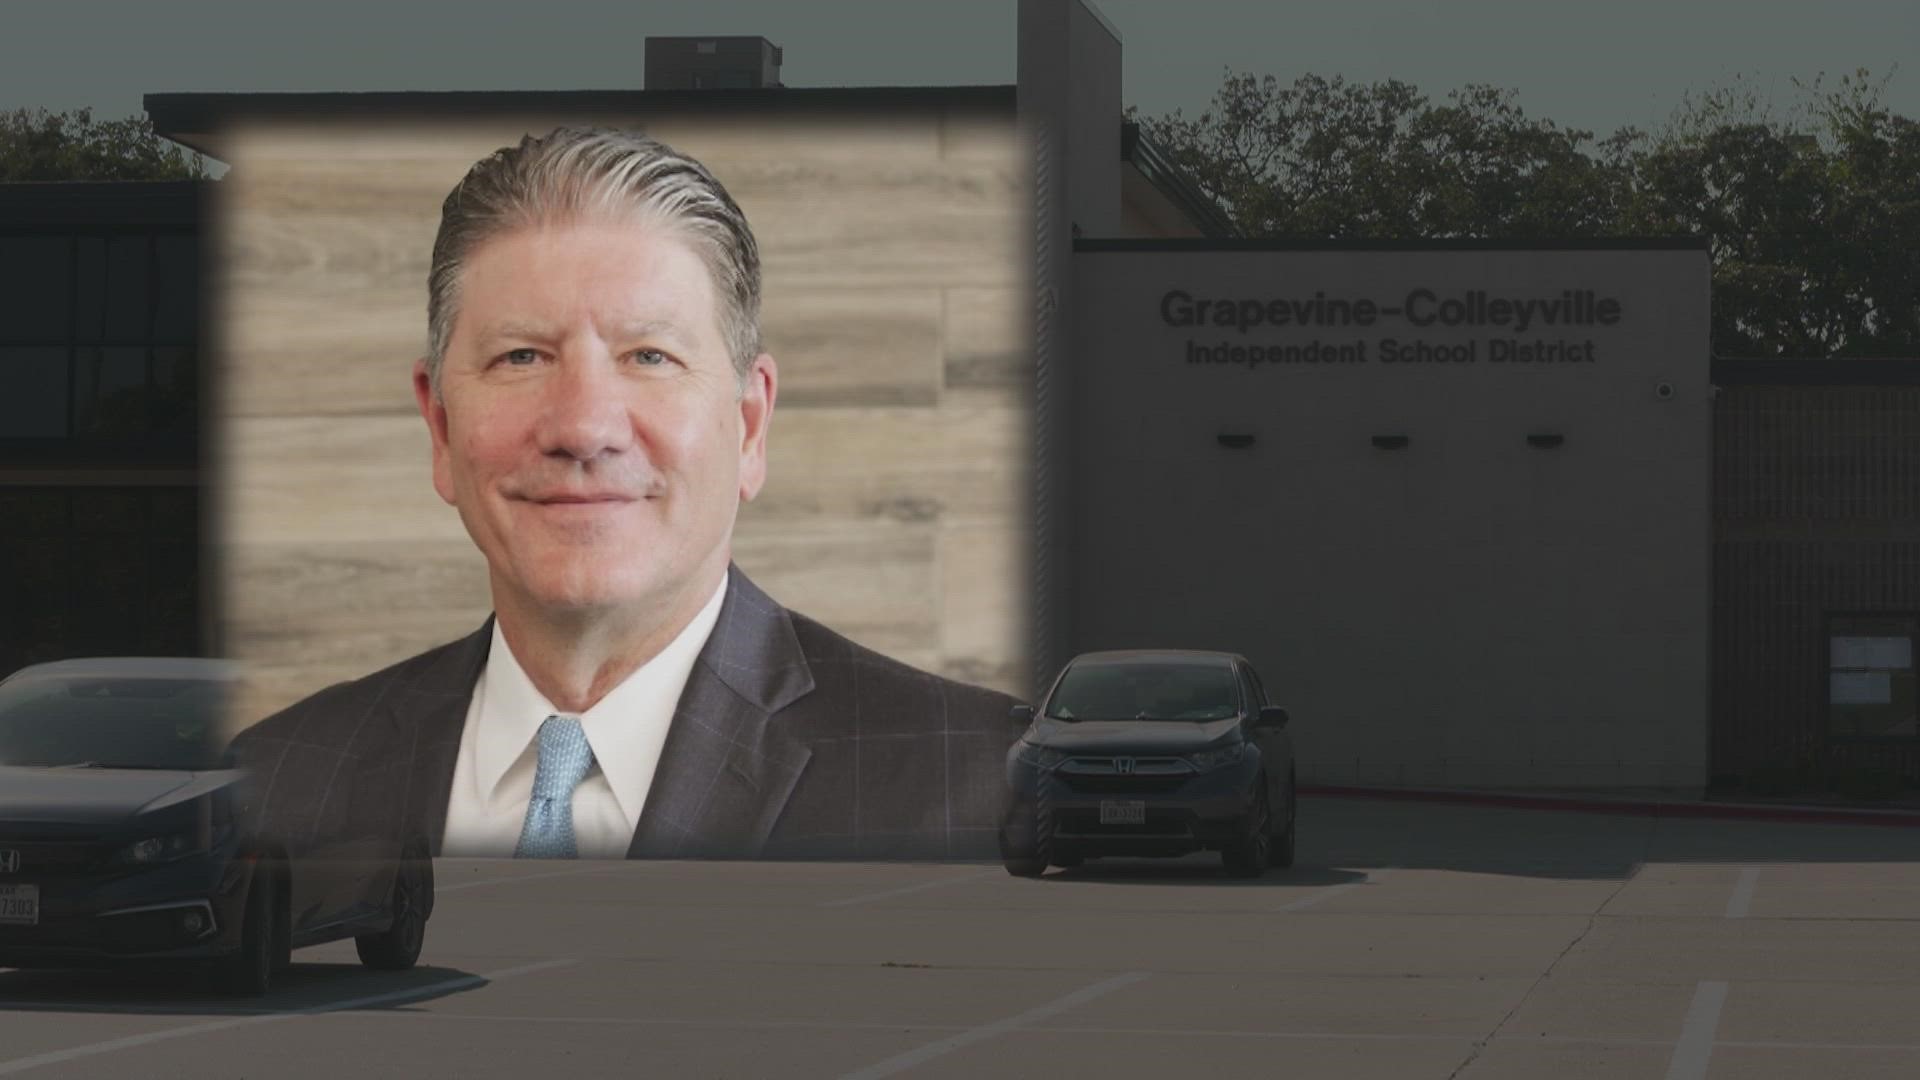 Dr. Robin Ryan served 13 years as superintendent for Grapevine-Colleyville ISD.